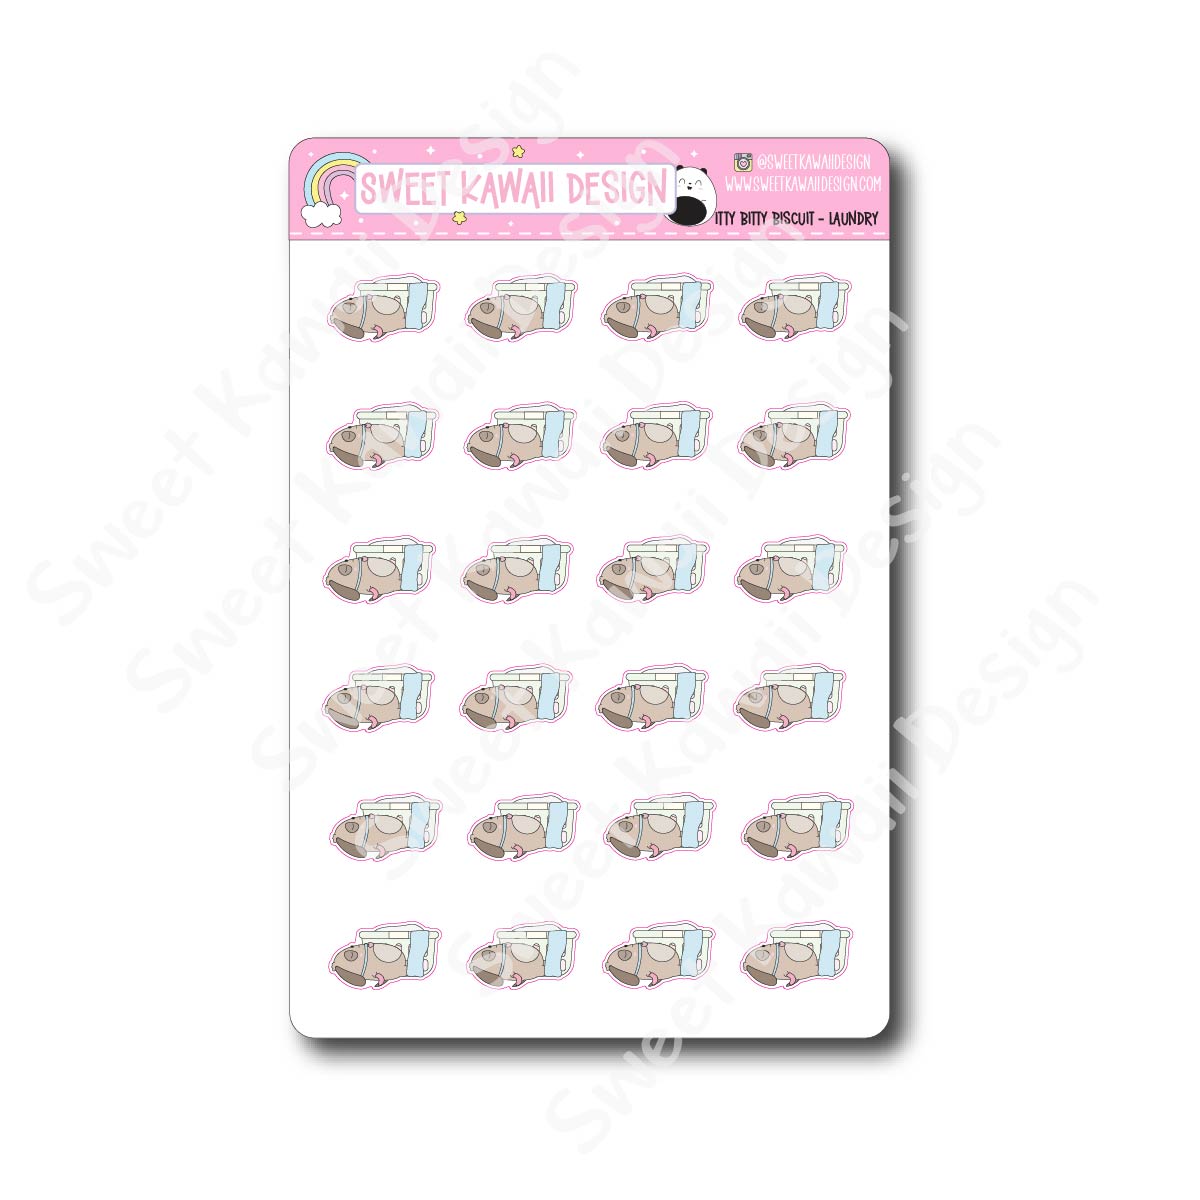 Kawaii Biscuit Stickers - Laundry